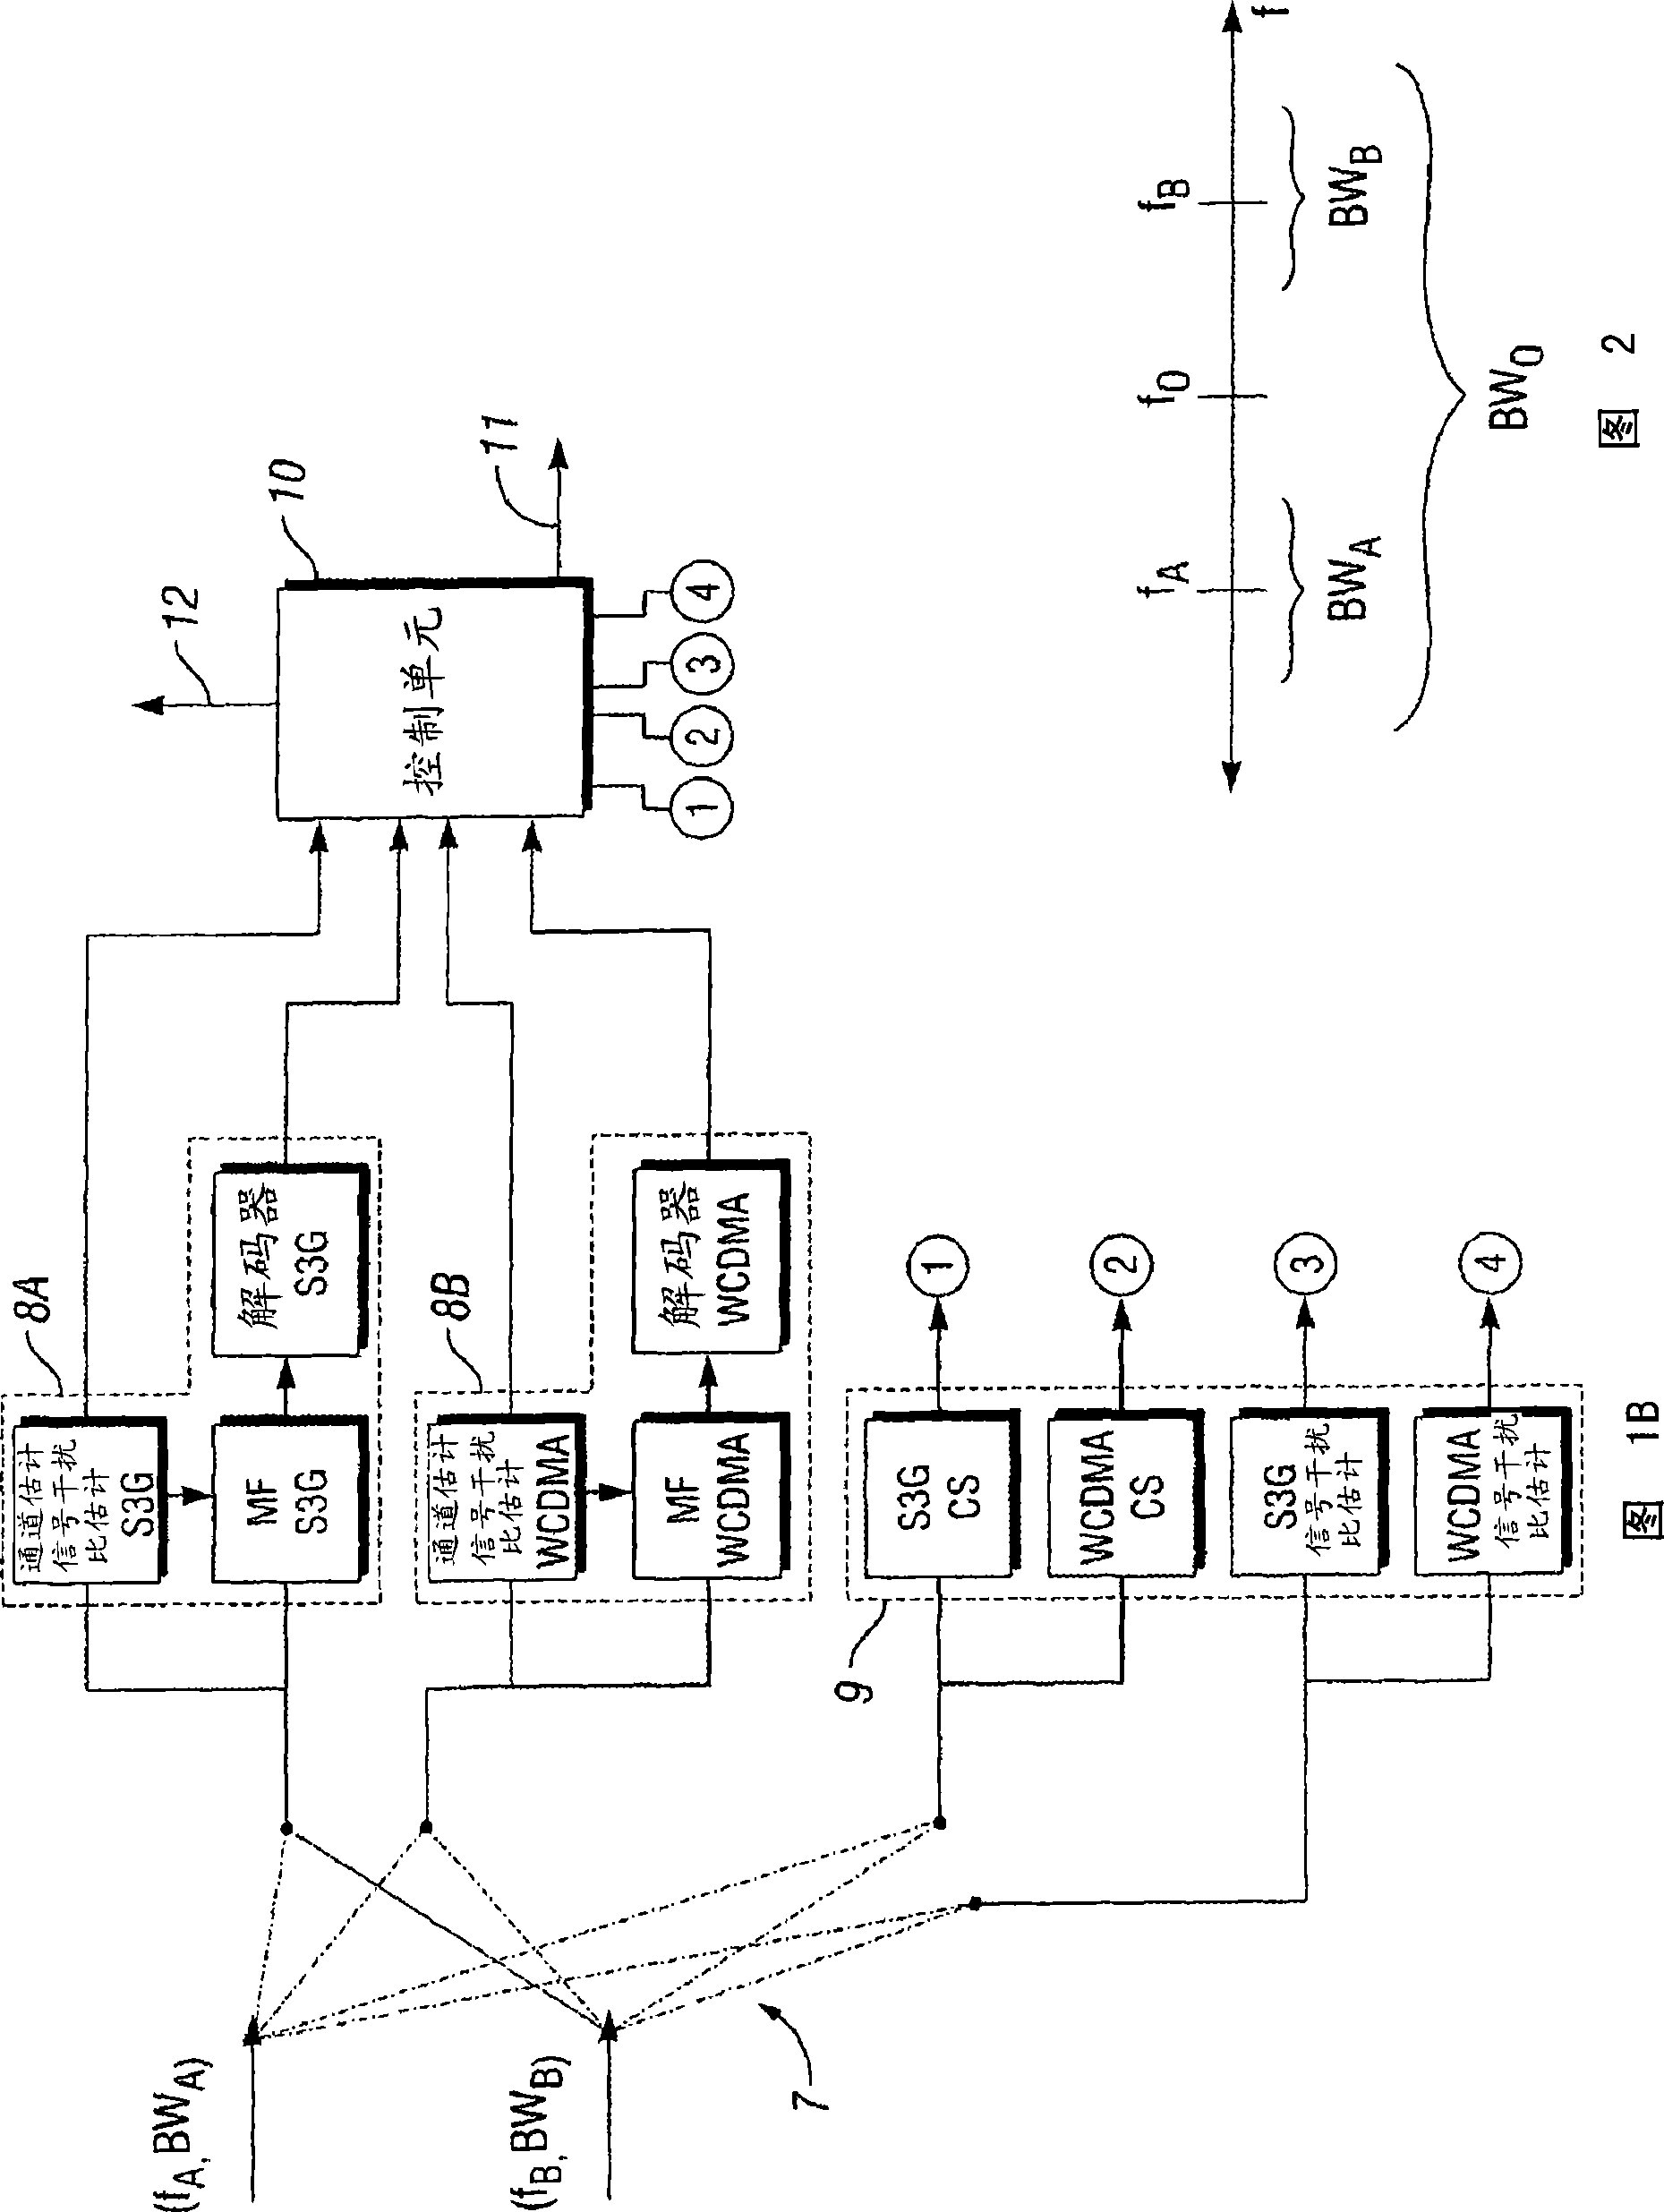 Apparatus and method for efficient inter radio access technology operation